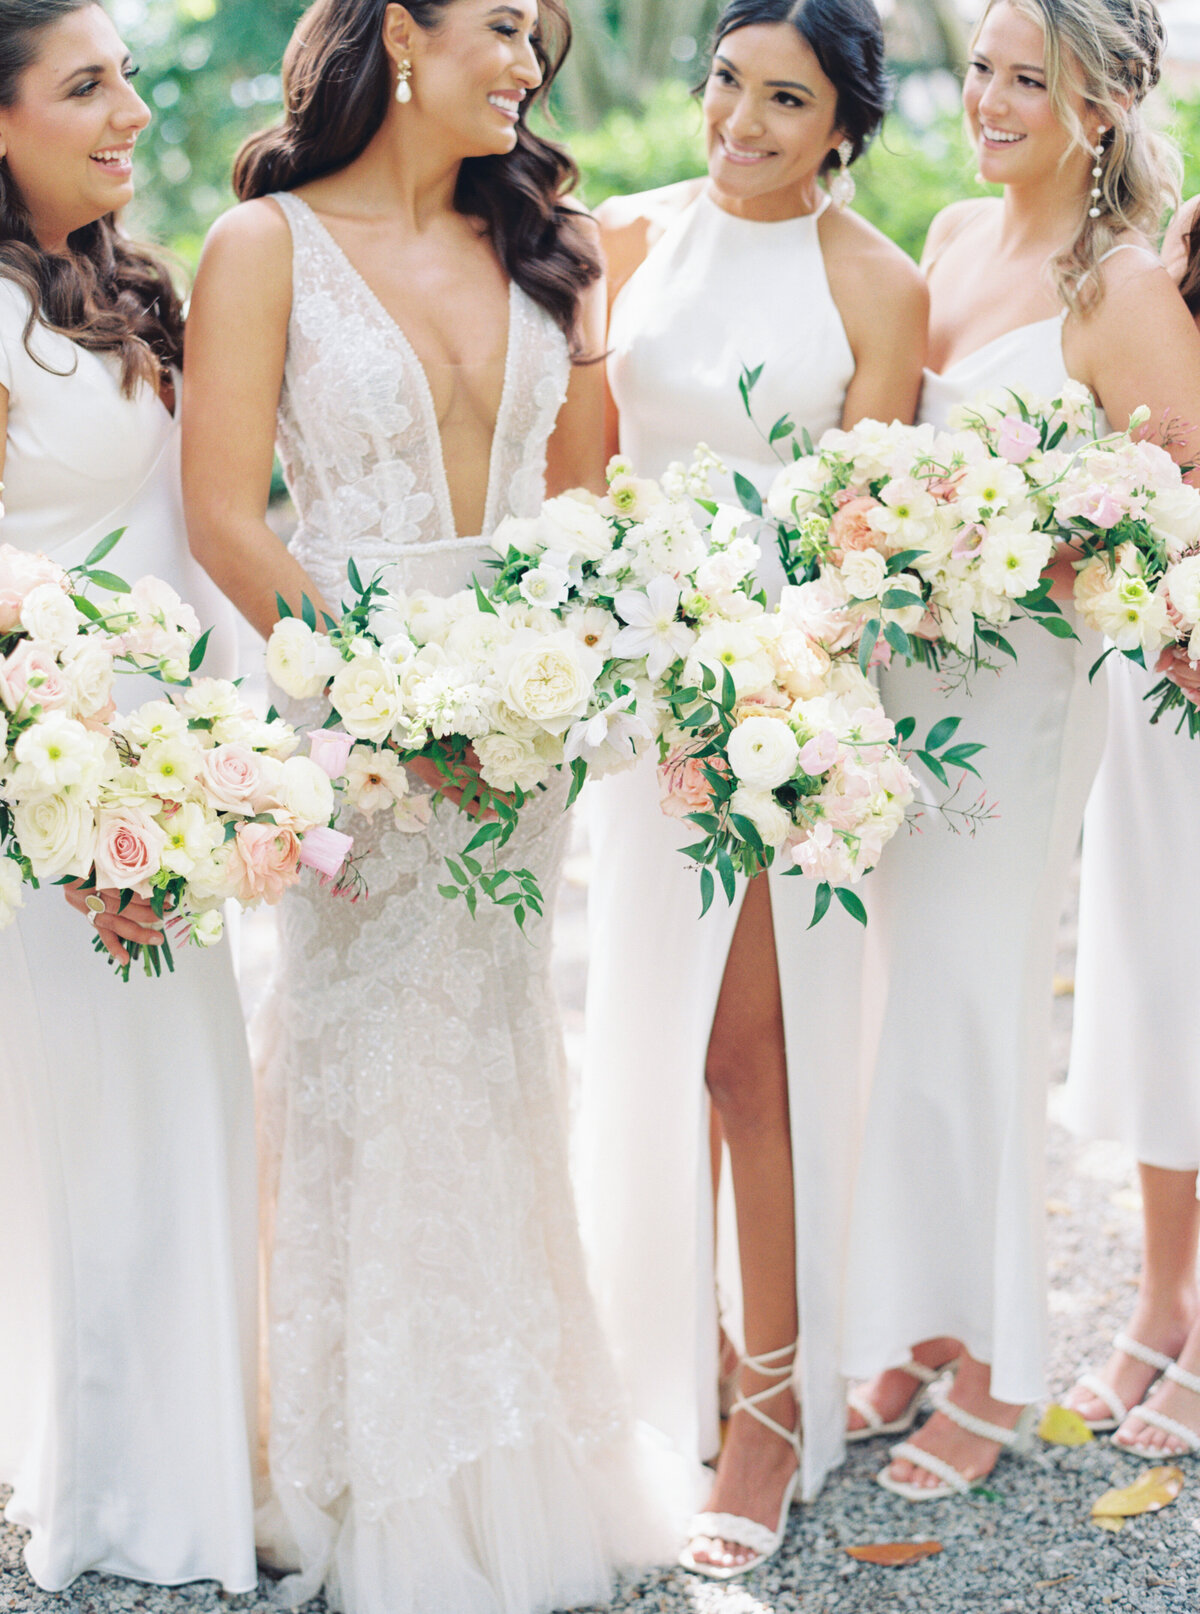 Bride and bridesmaids wearing white. Mostly white and green wedding flowers with touches of pale pink. Thomas Bennett House bride.